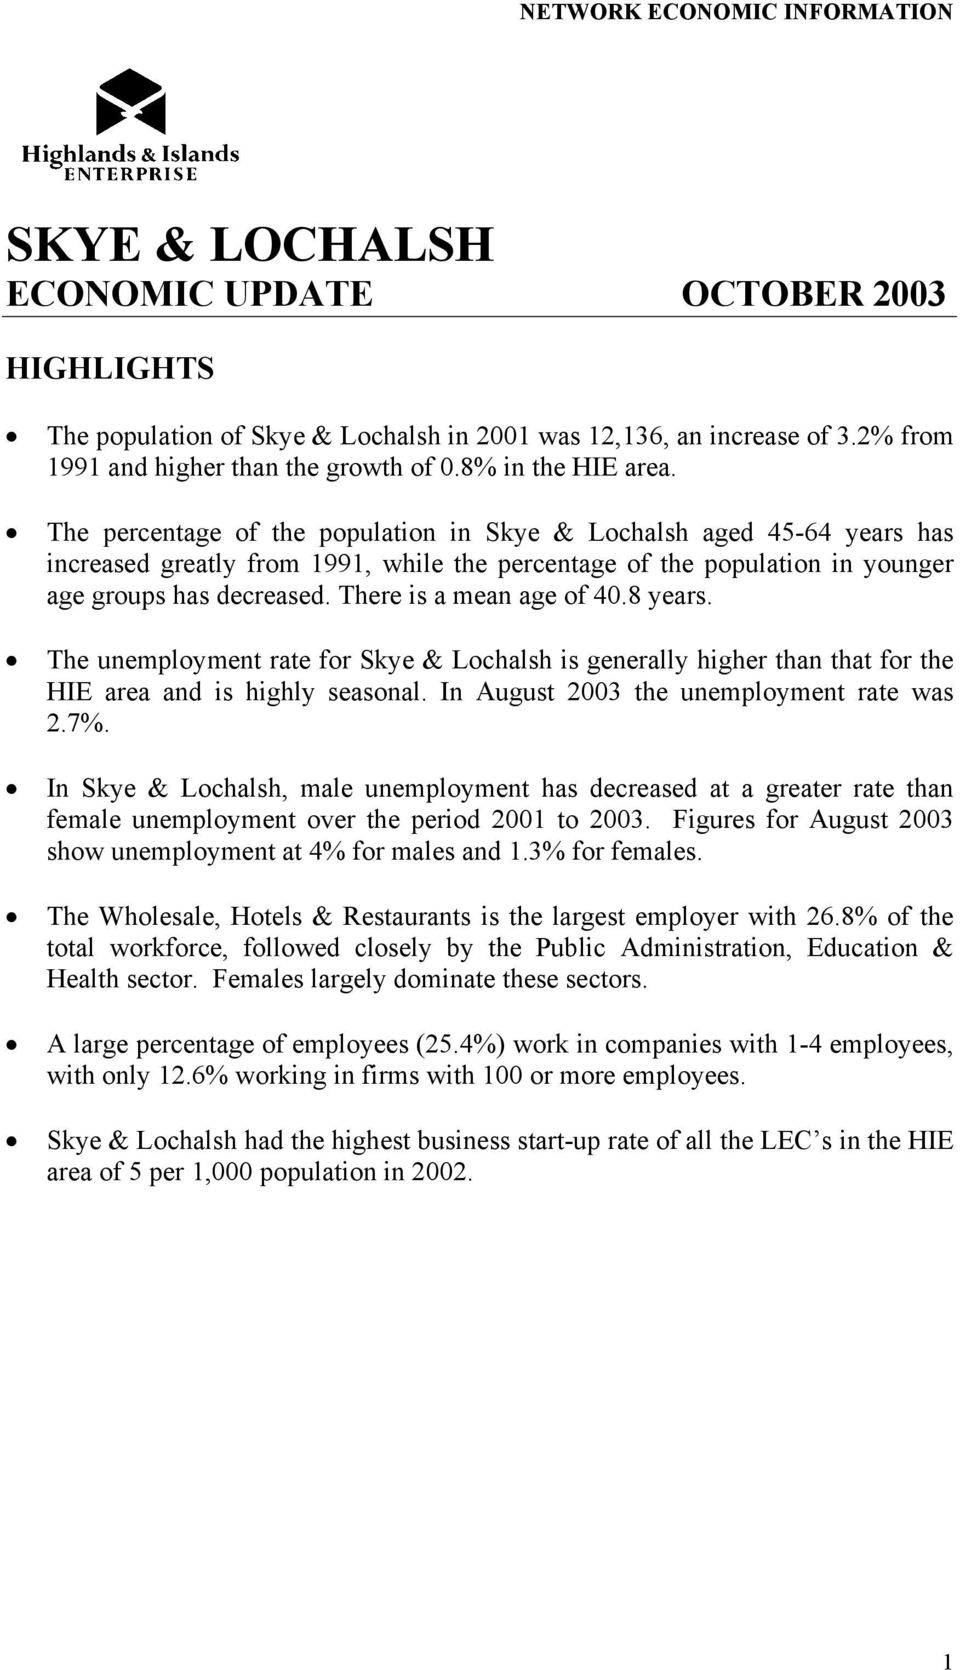 The percentage of the population in Skye & Lochalsh aged 4-64 years has increased greatly from 1991, while the percentage of the population in younger age groups has decreased.